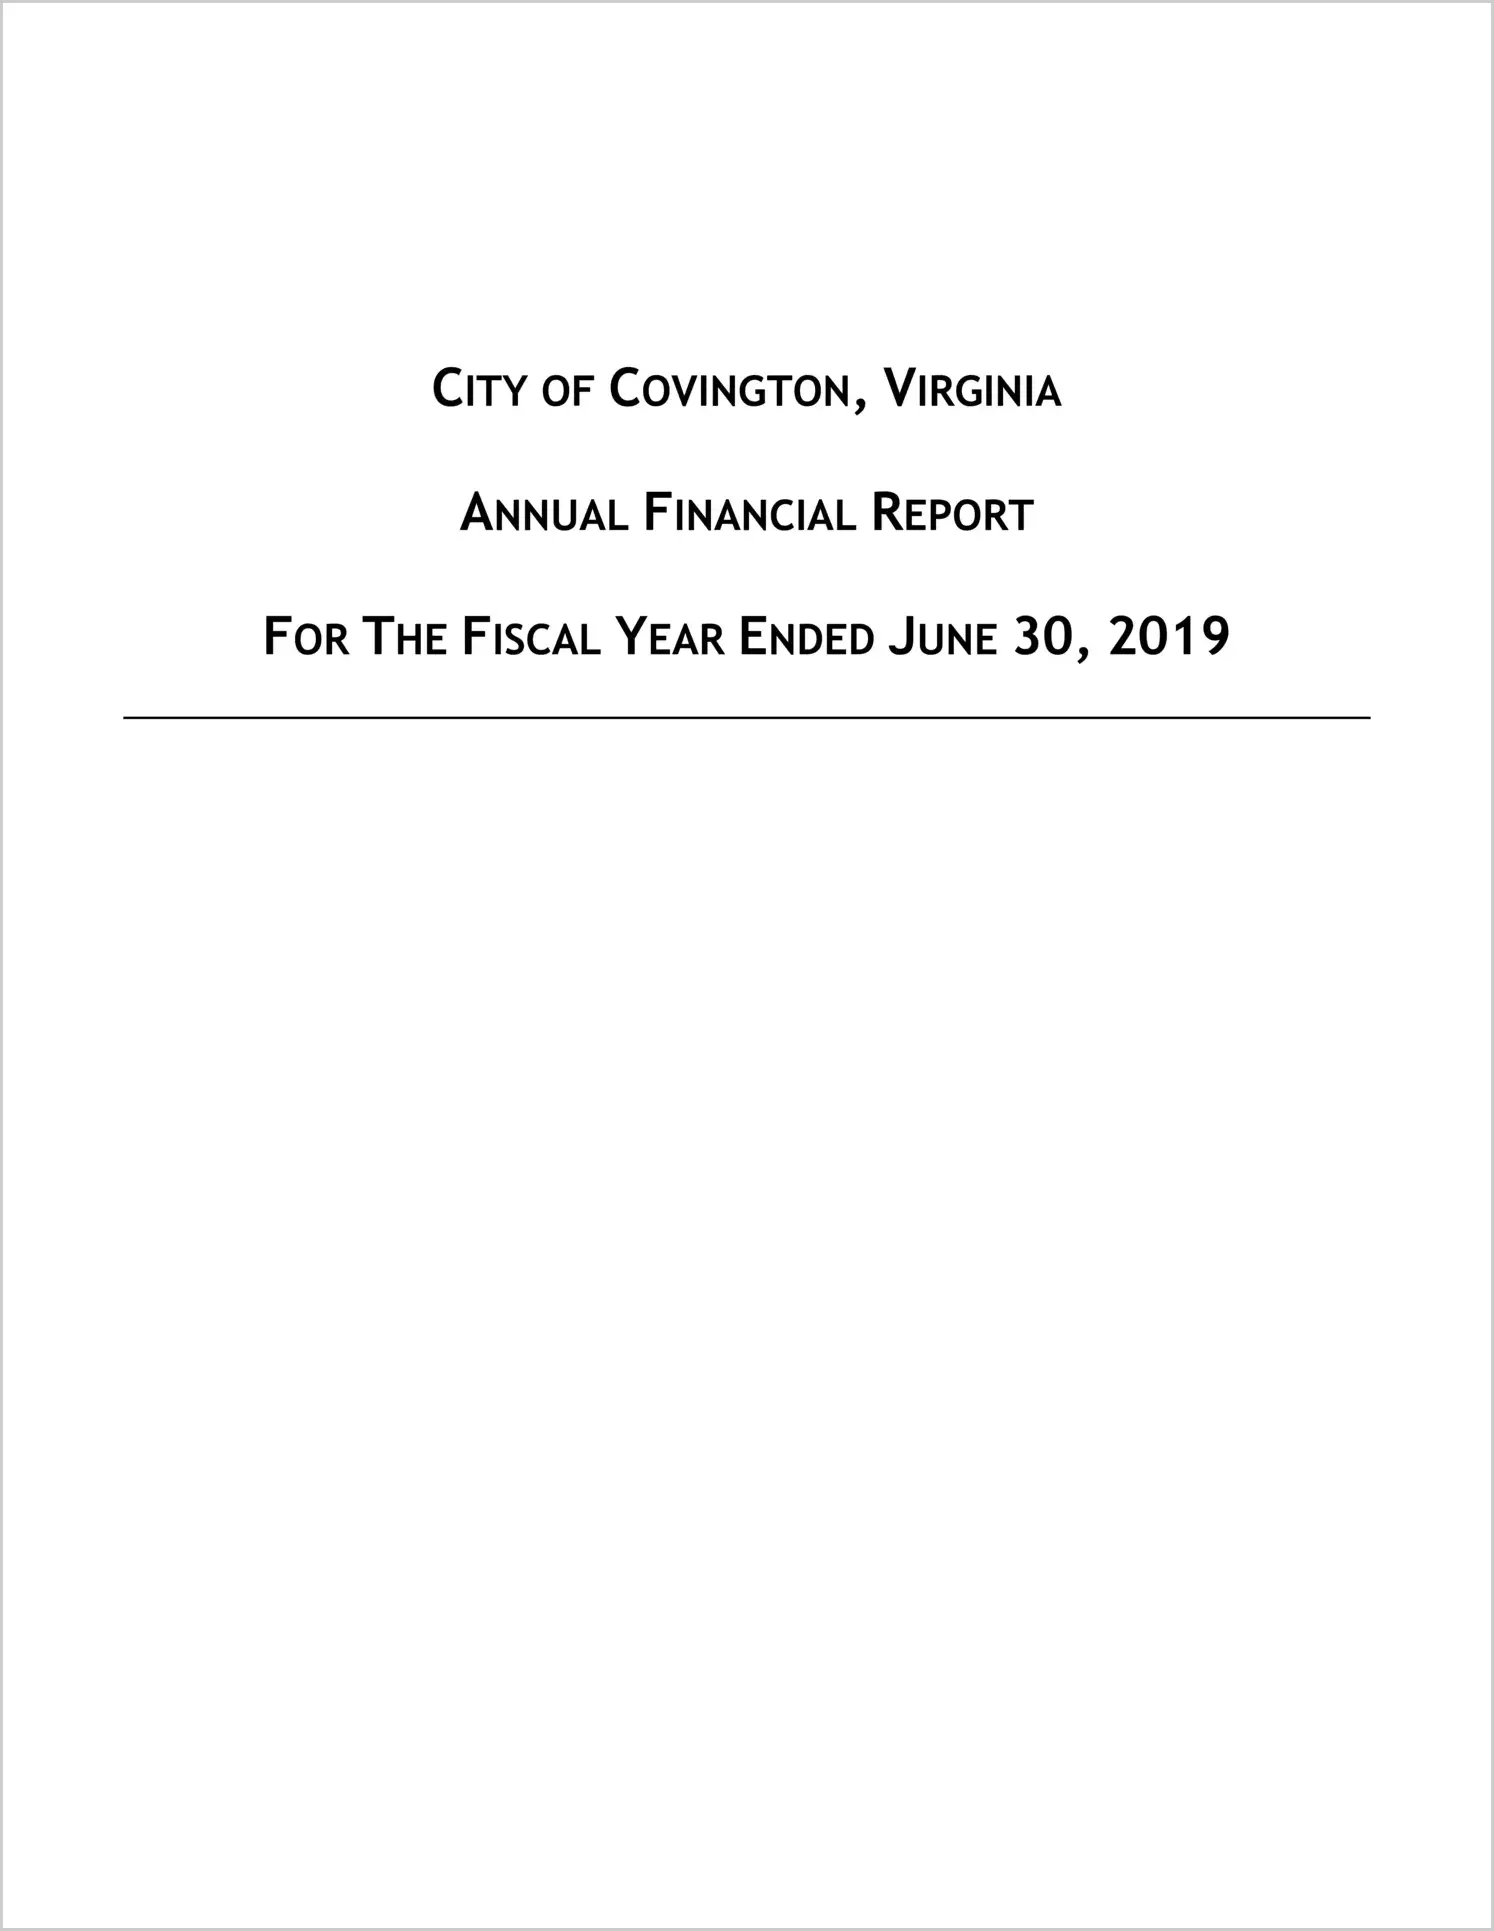 2019 Annual Financial Report for City of Covington